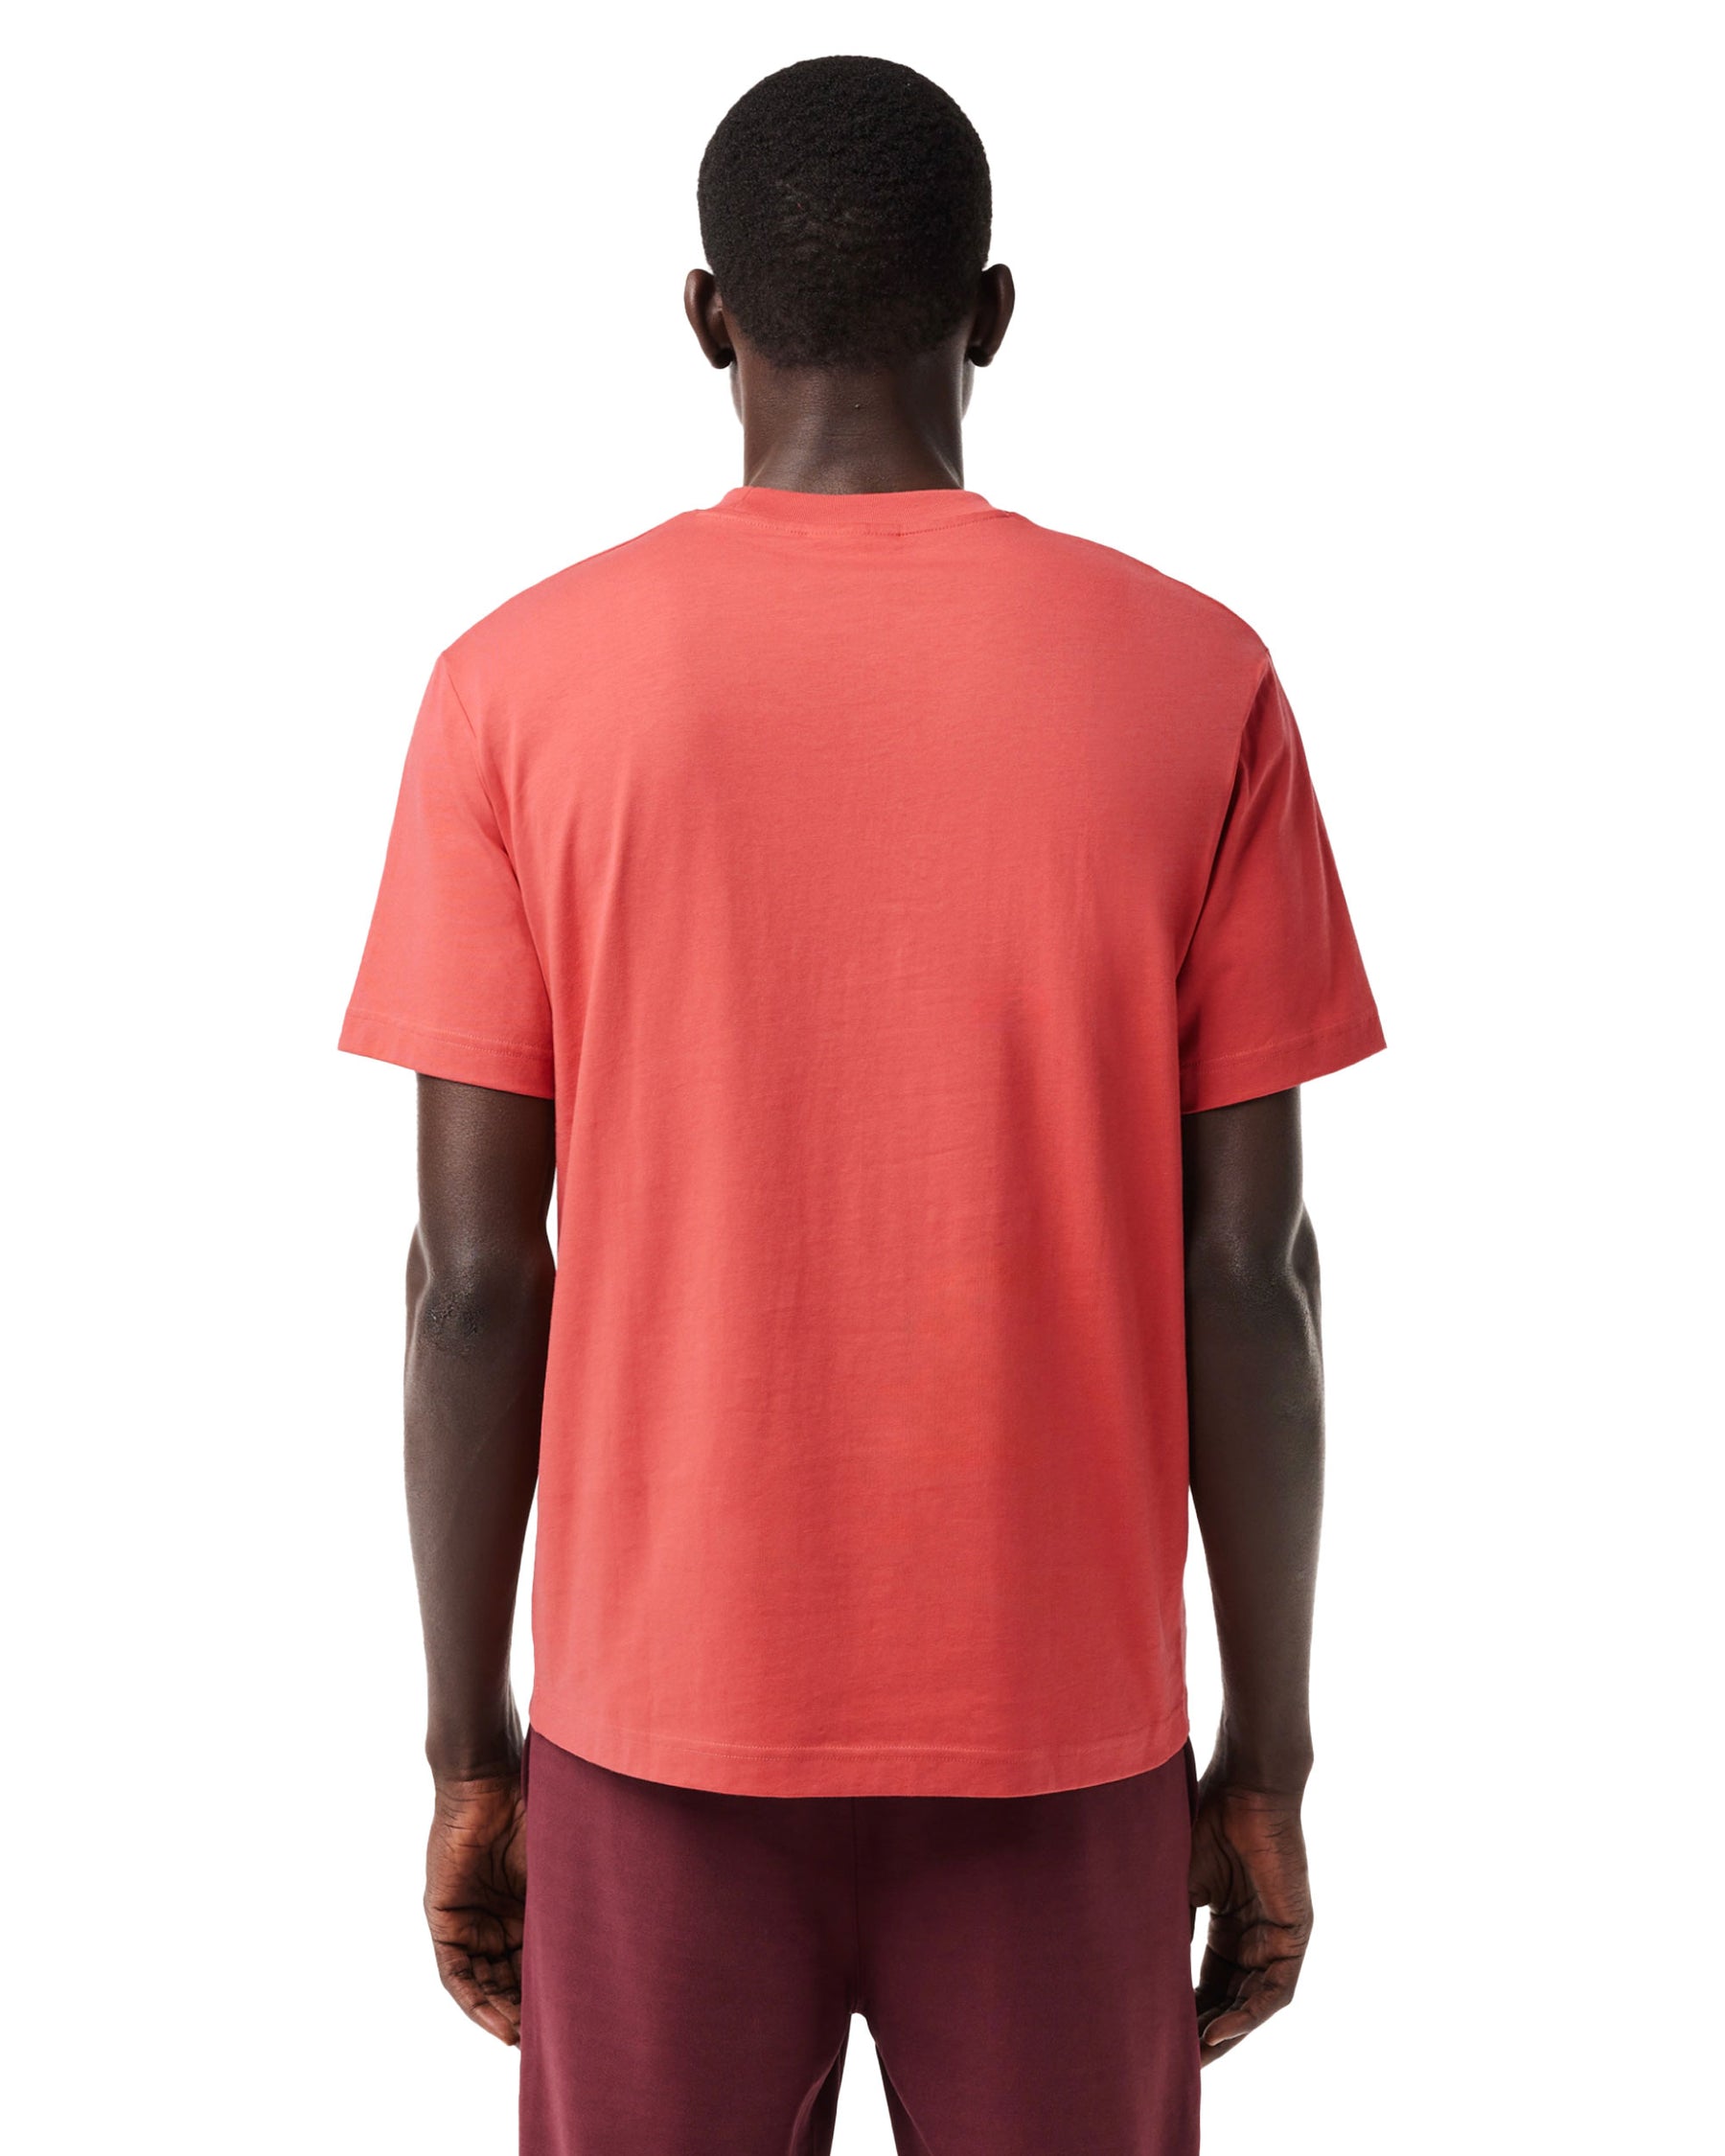 Man Tee Lacoste Small Logo Coral